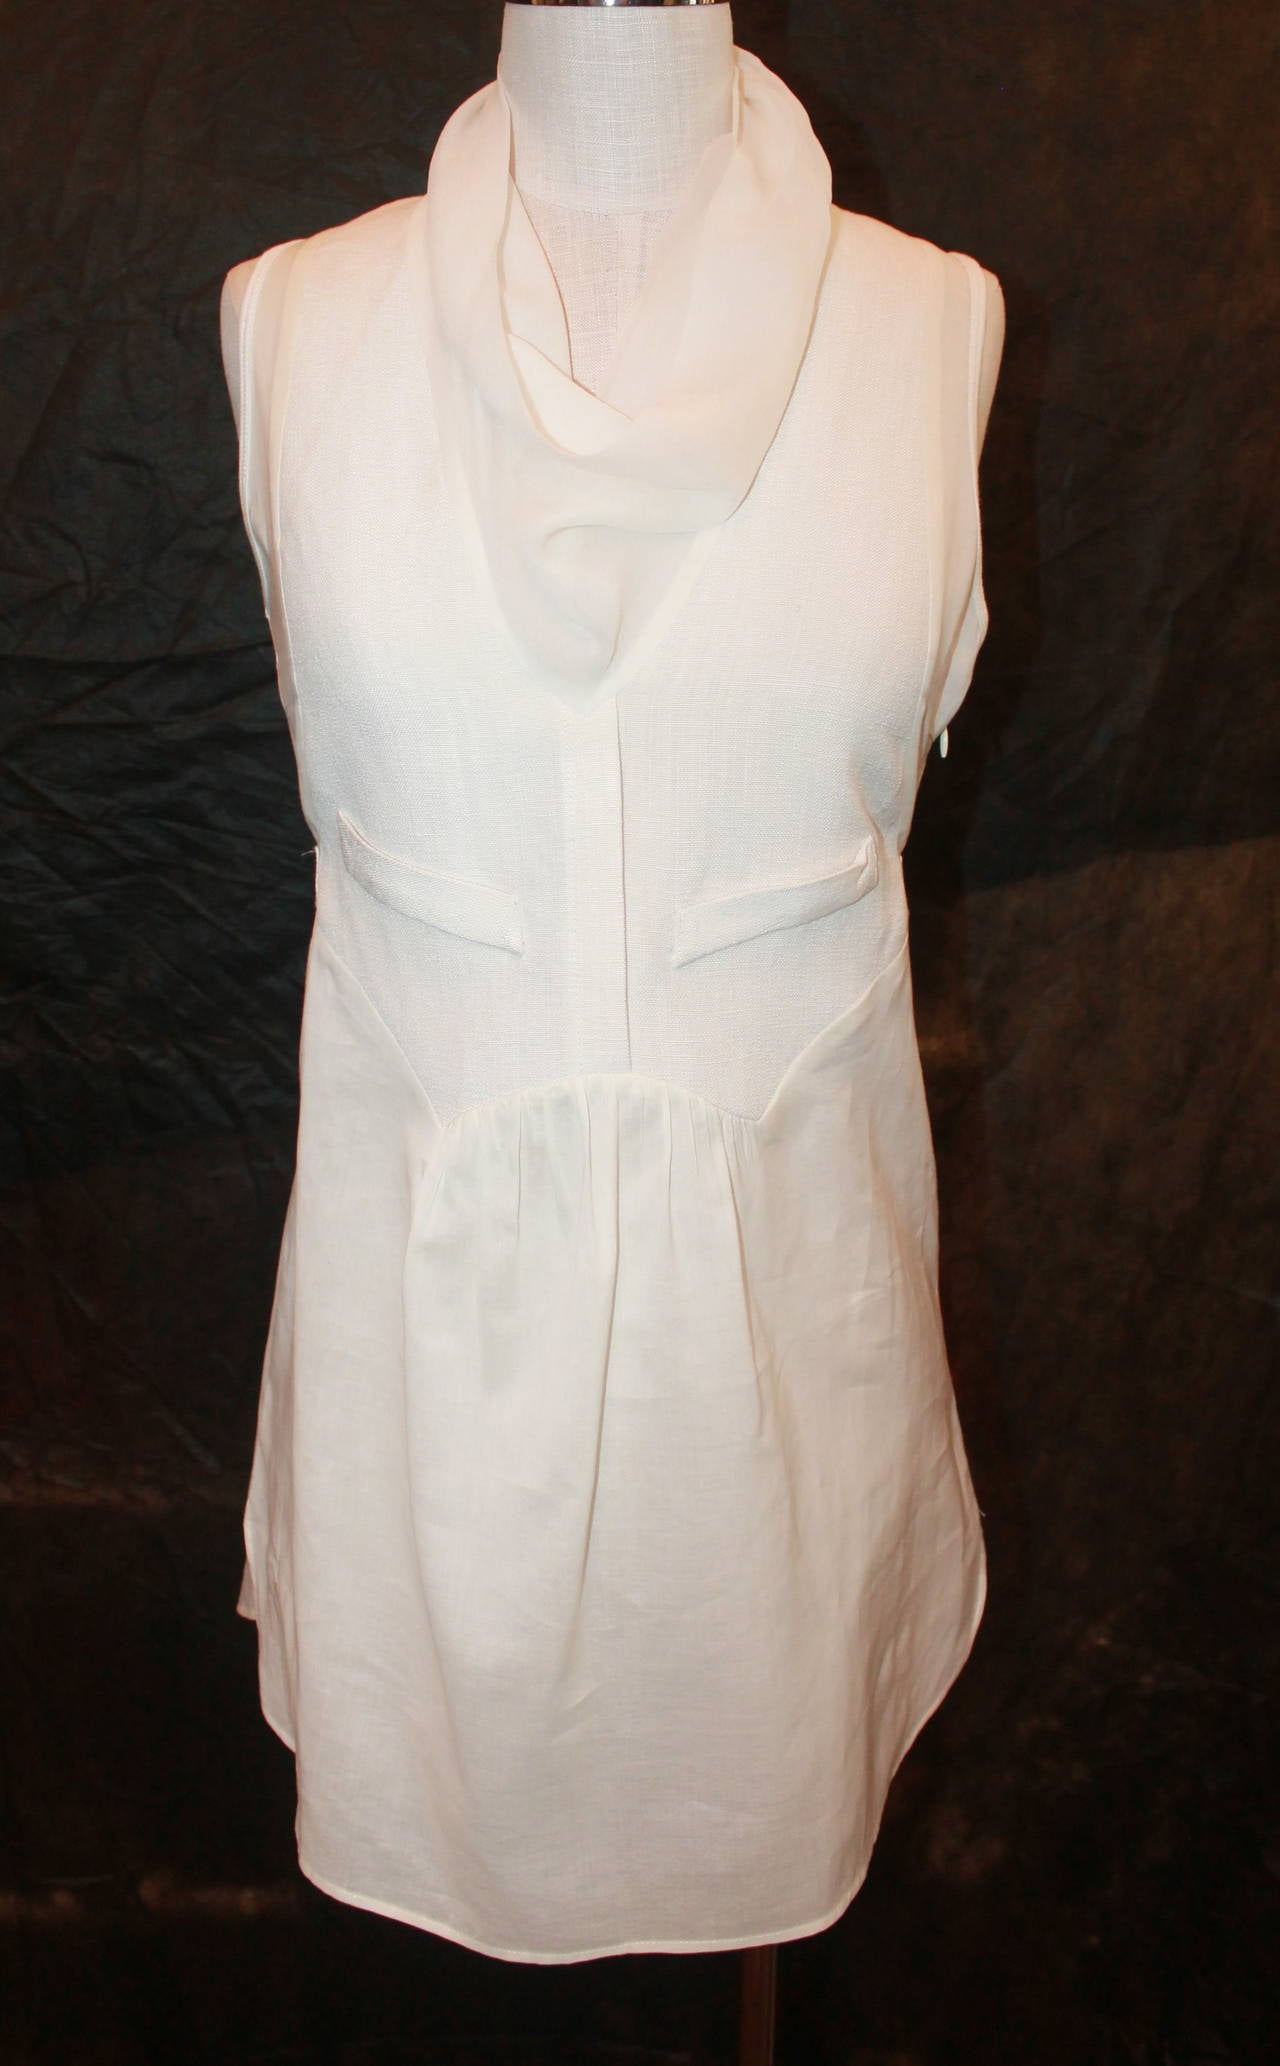 Brunello Cucinelli Ivory Linen & Silk Tunic Top - S. This top is in excellent condition. 

Measurements:
Bust- 29